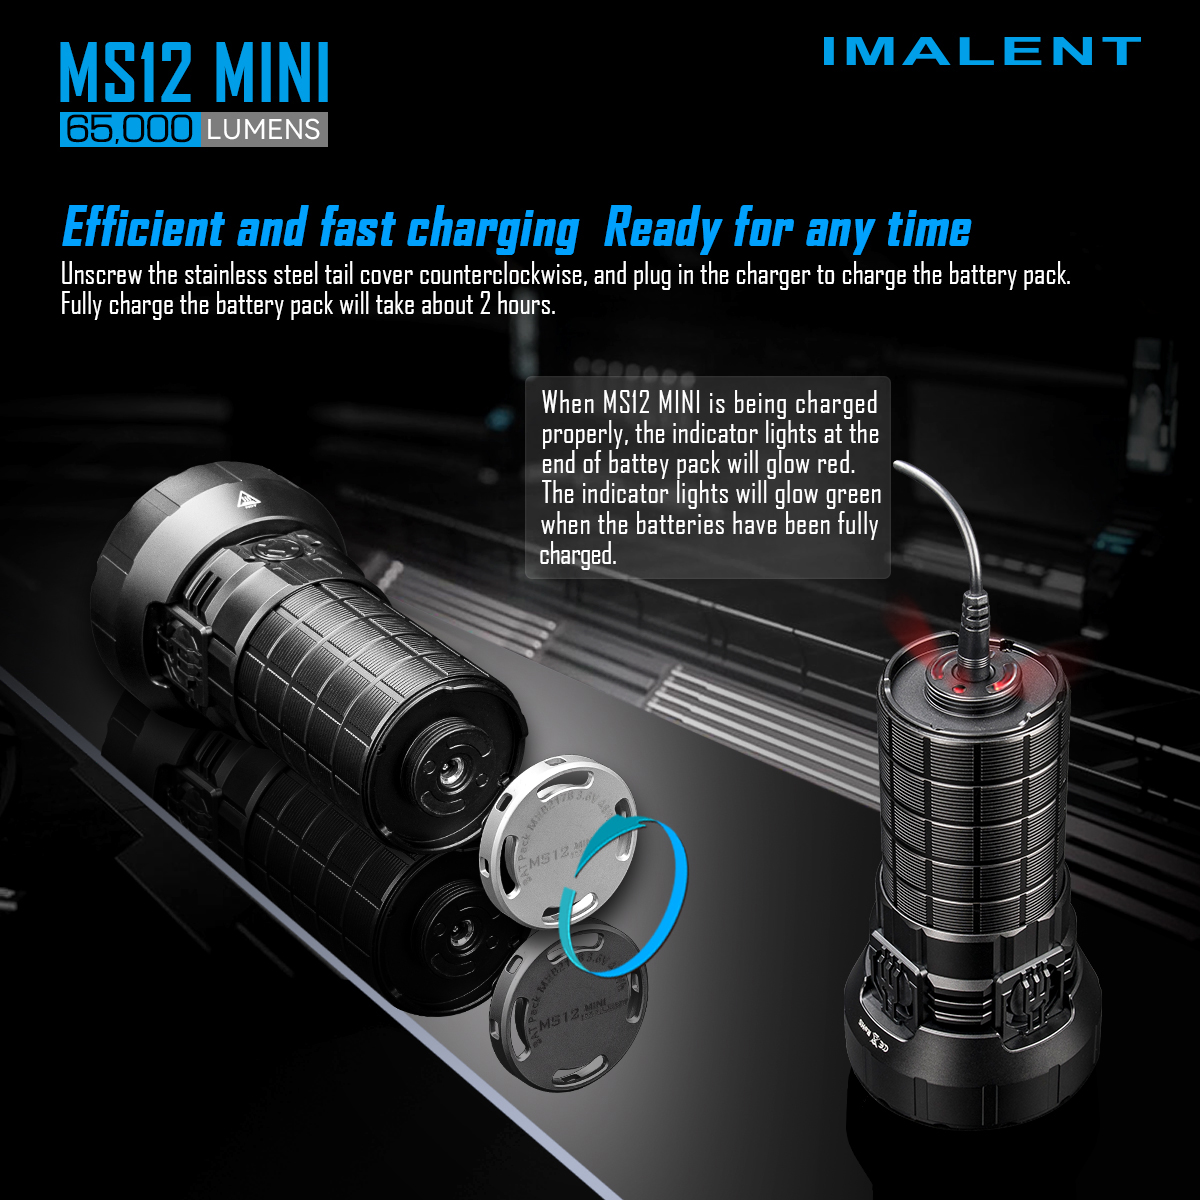 IMALENT-MS12-MINI-65000LM-Flashlight-With-12-Pieces-XHP702-LED-Portable-EDC-IP56-Waterproof-Led-Torc-1940968-11